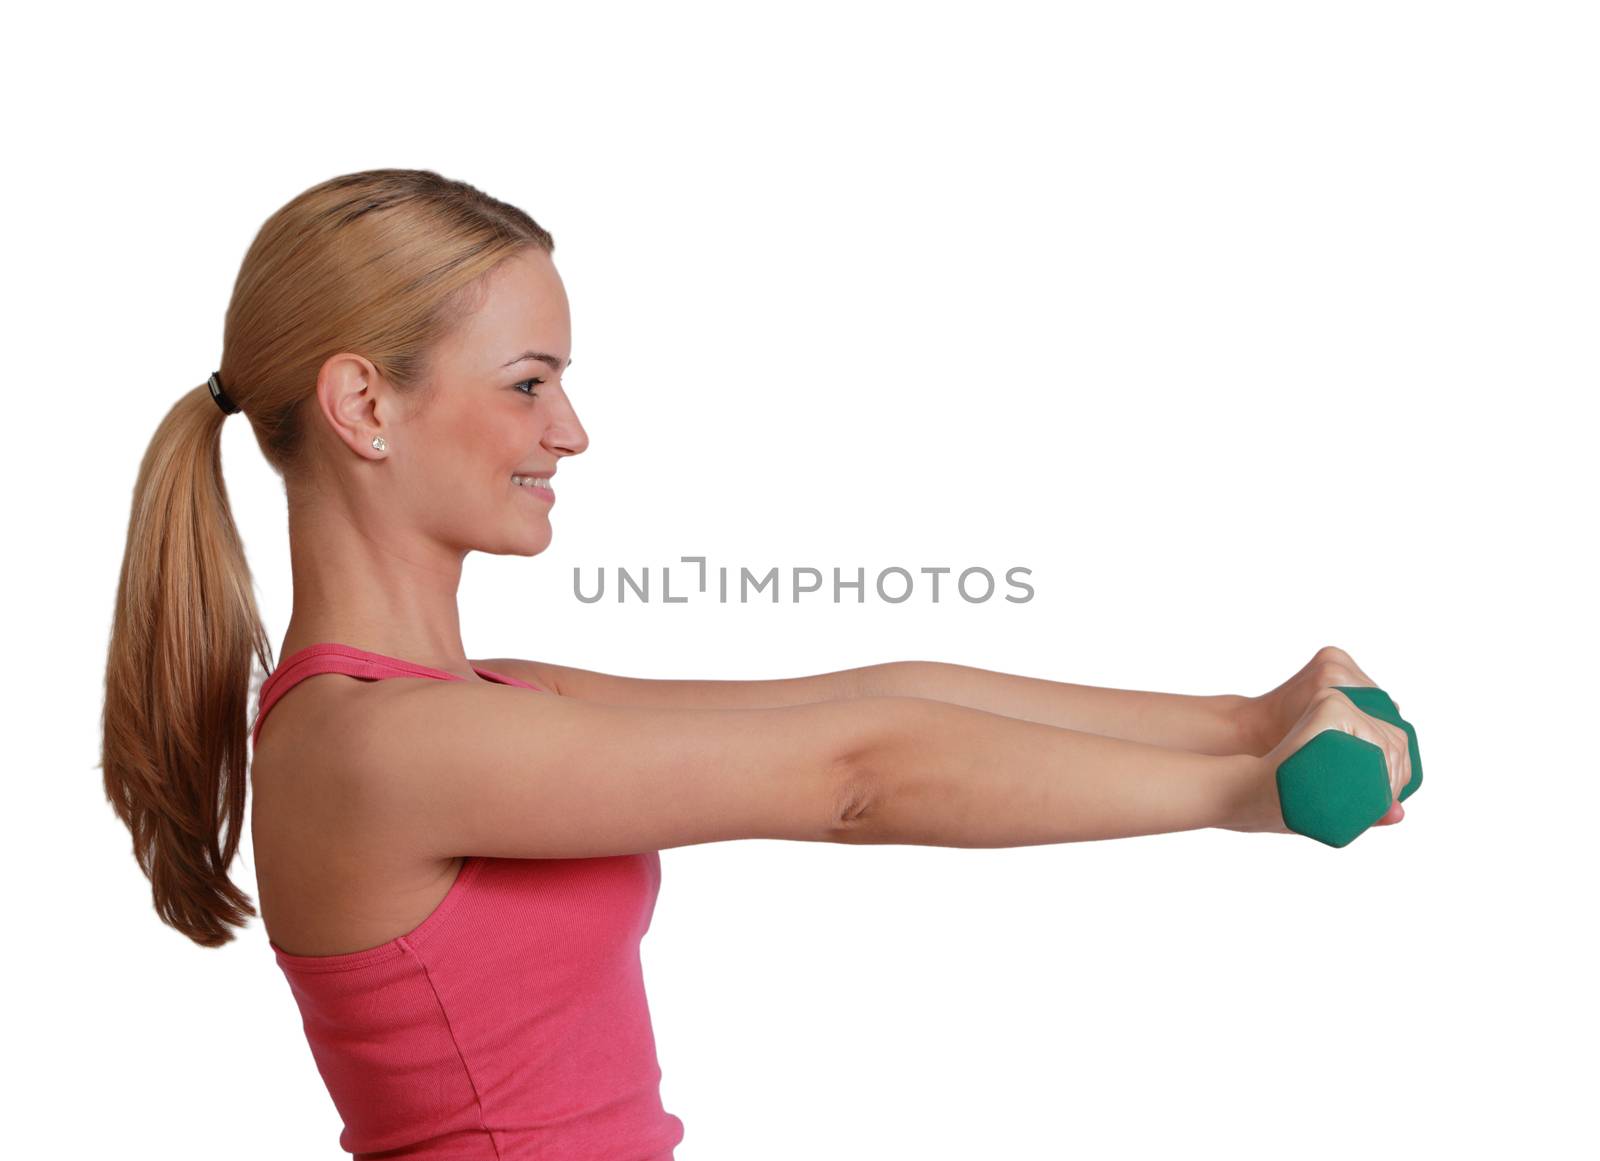 Profile of a young blonde woman doing exercise with dumbbells isolated against a white background.